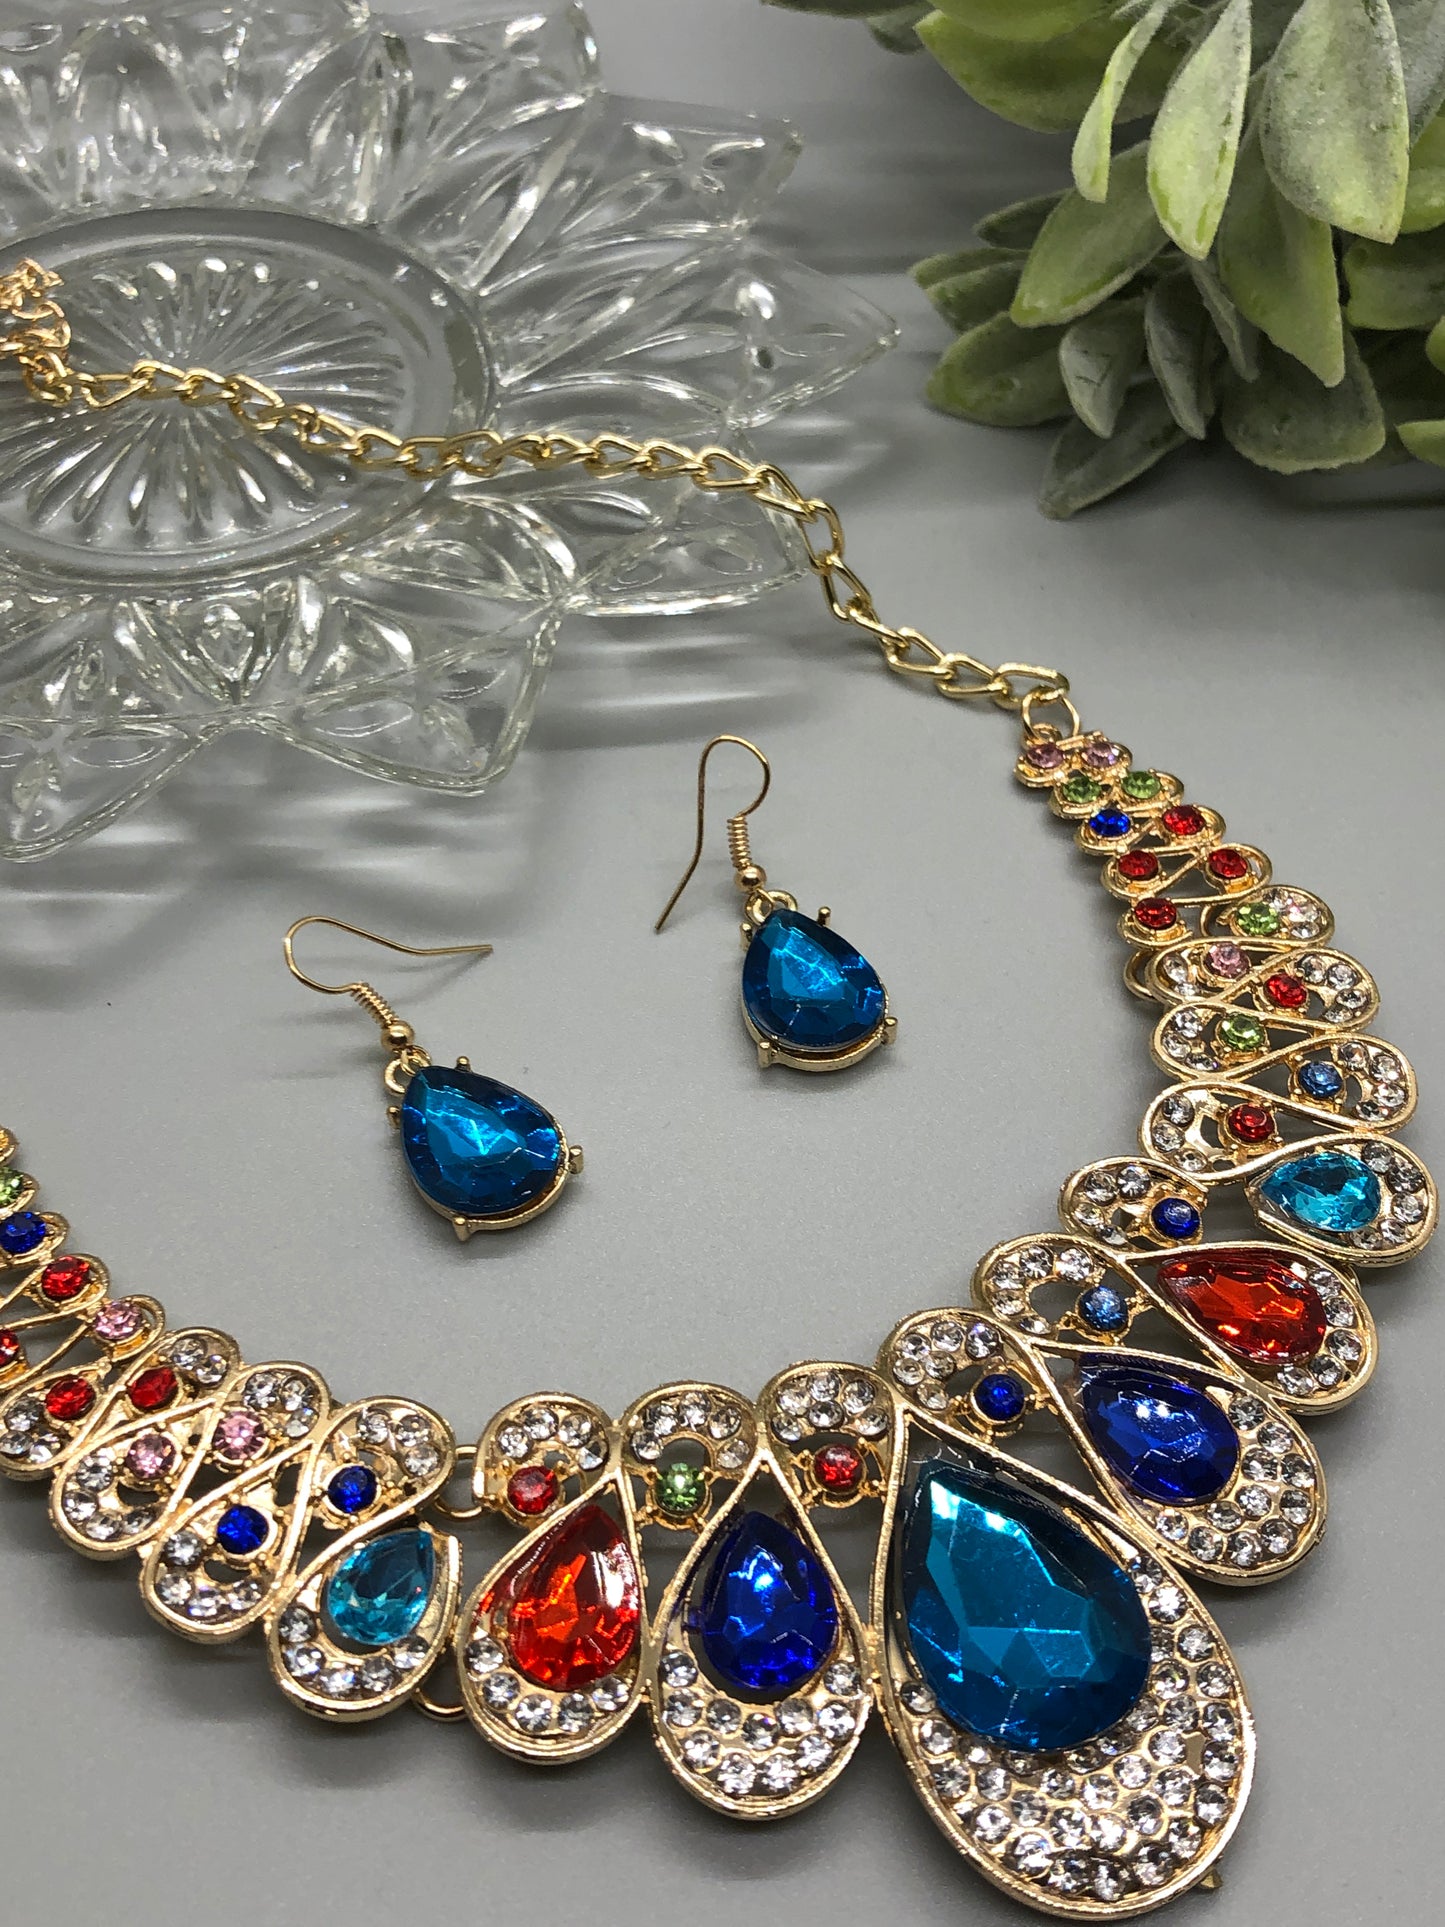 Rainbow Multi Color Crystal Rhinestone Bridal Necklace Earrings Sets Wedding Formal Shower Party Event Accessories #011